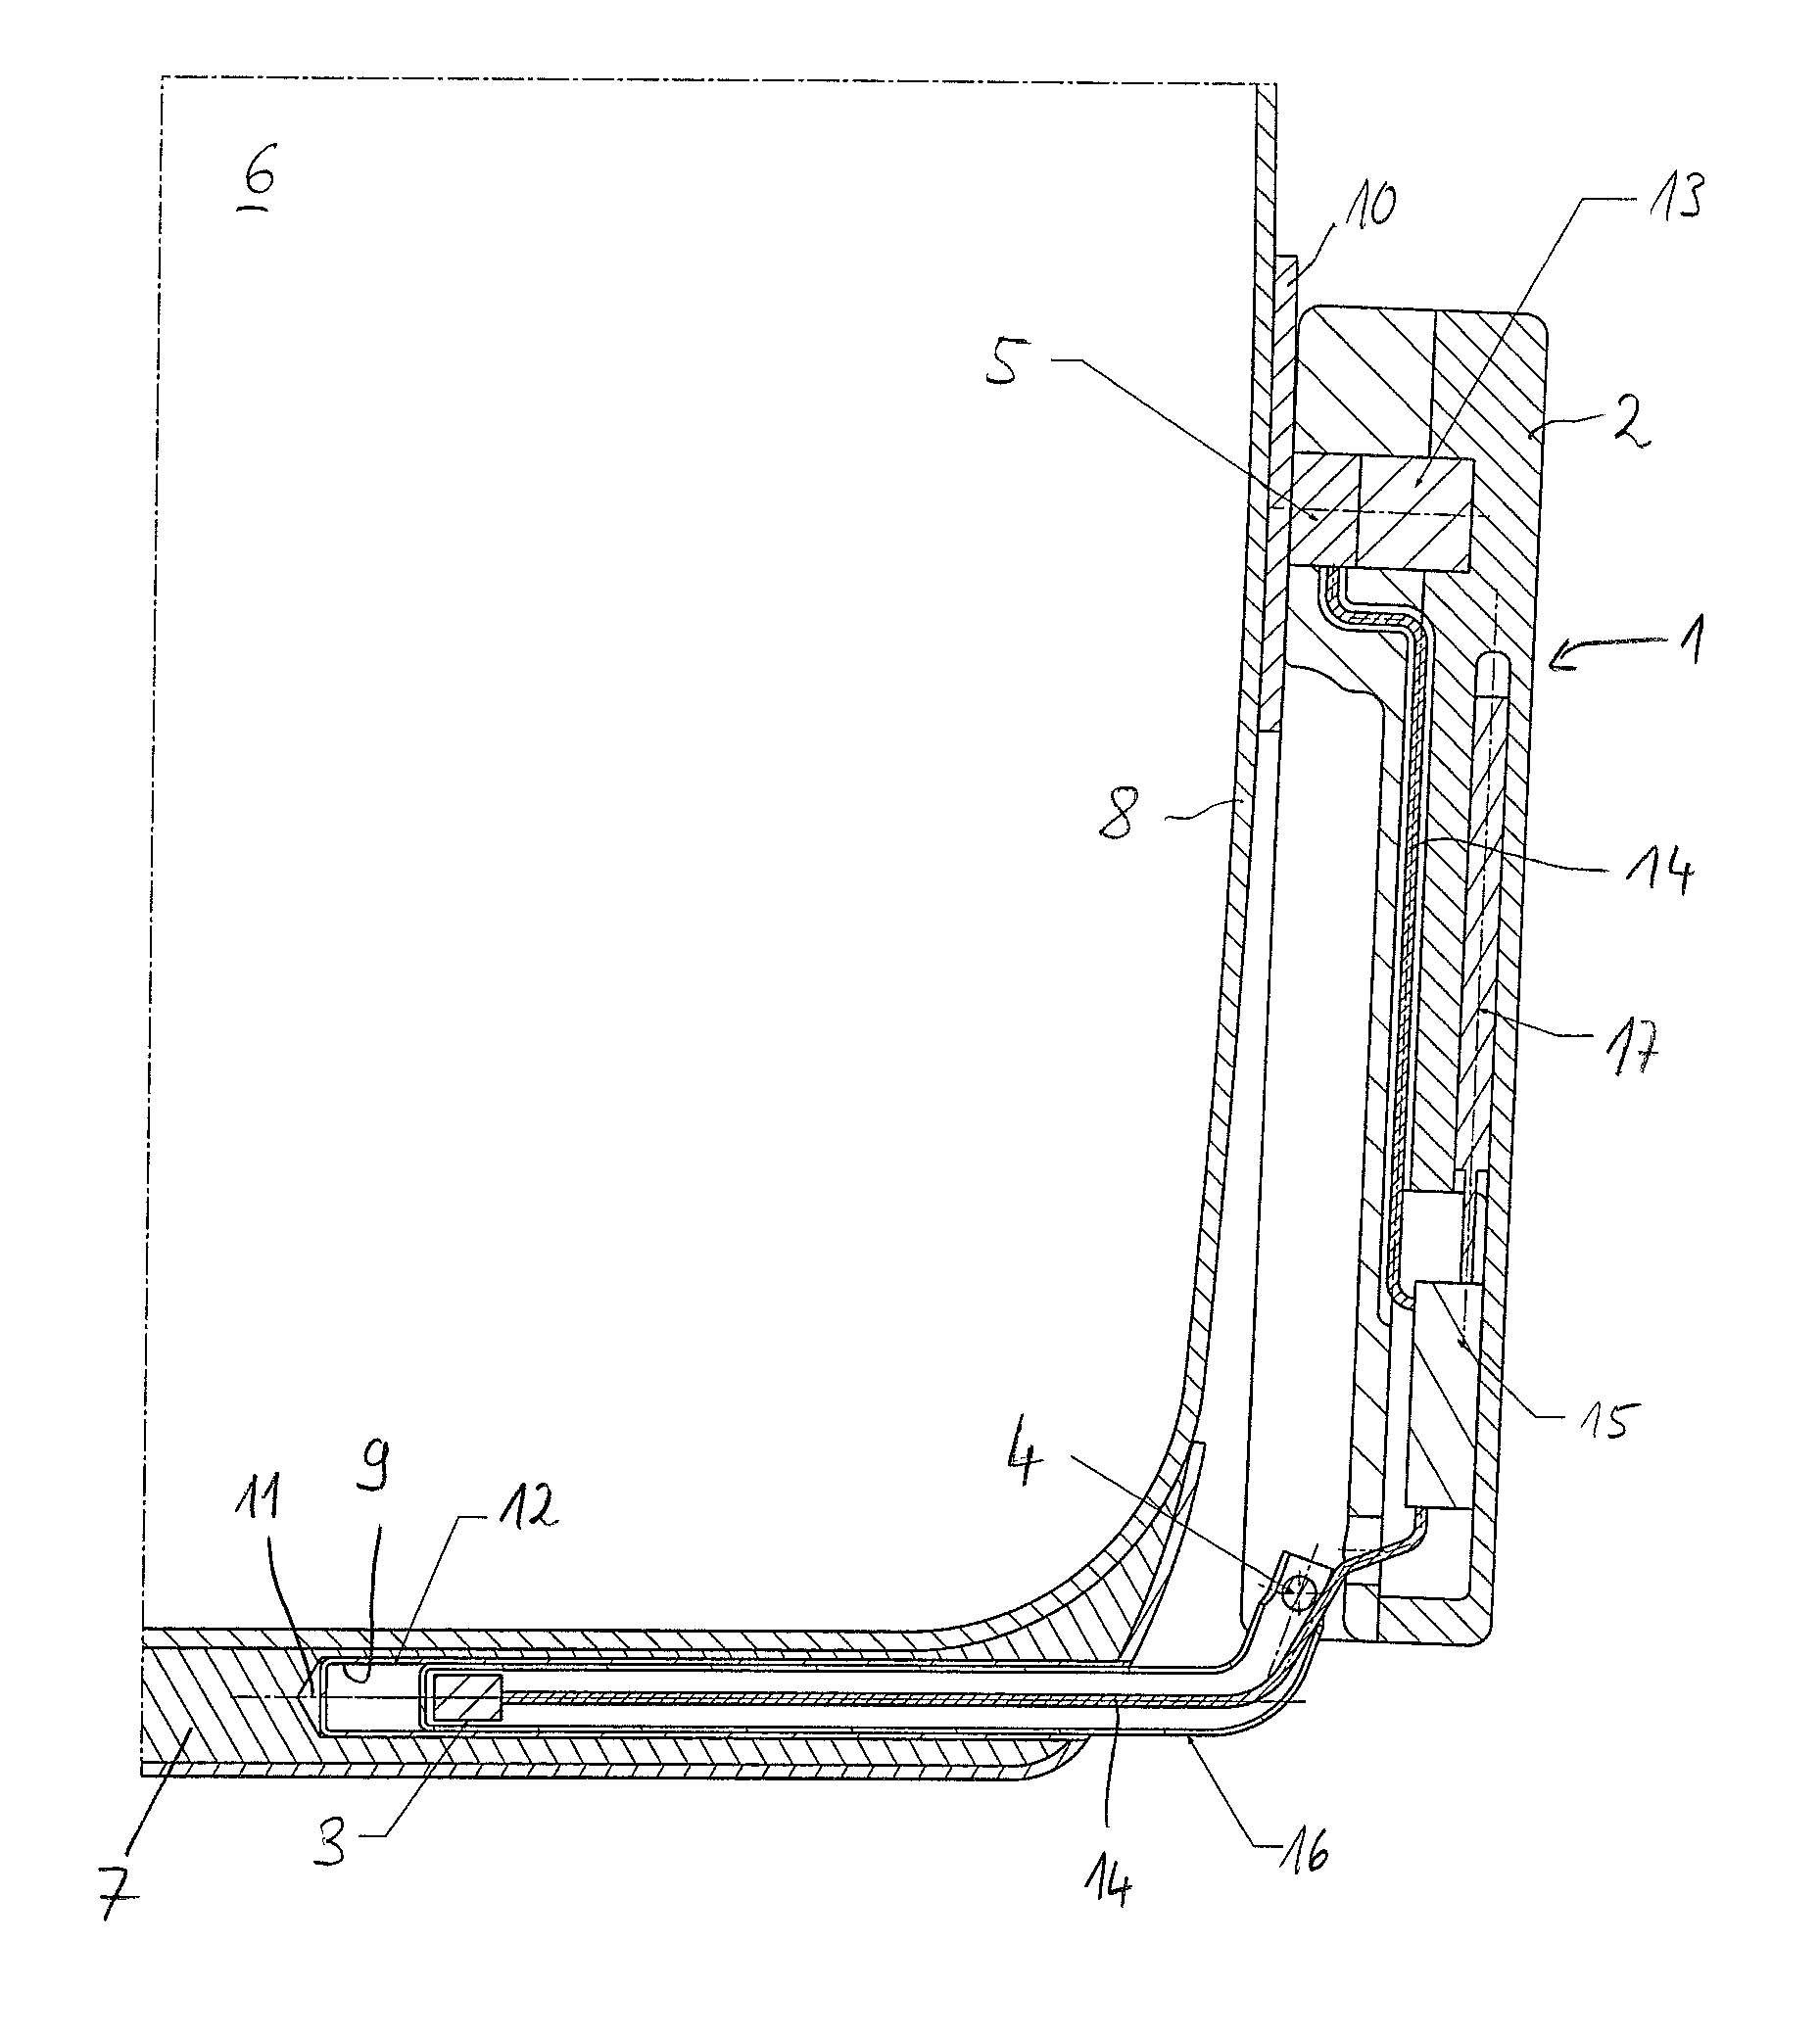 Electronic module for temperature-monitored preparation of food in a cooking vessel